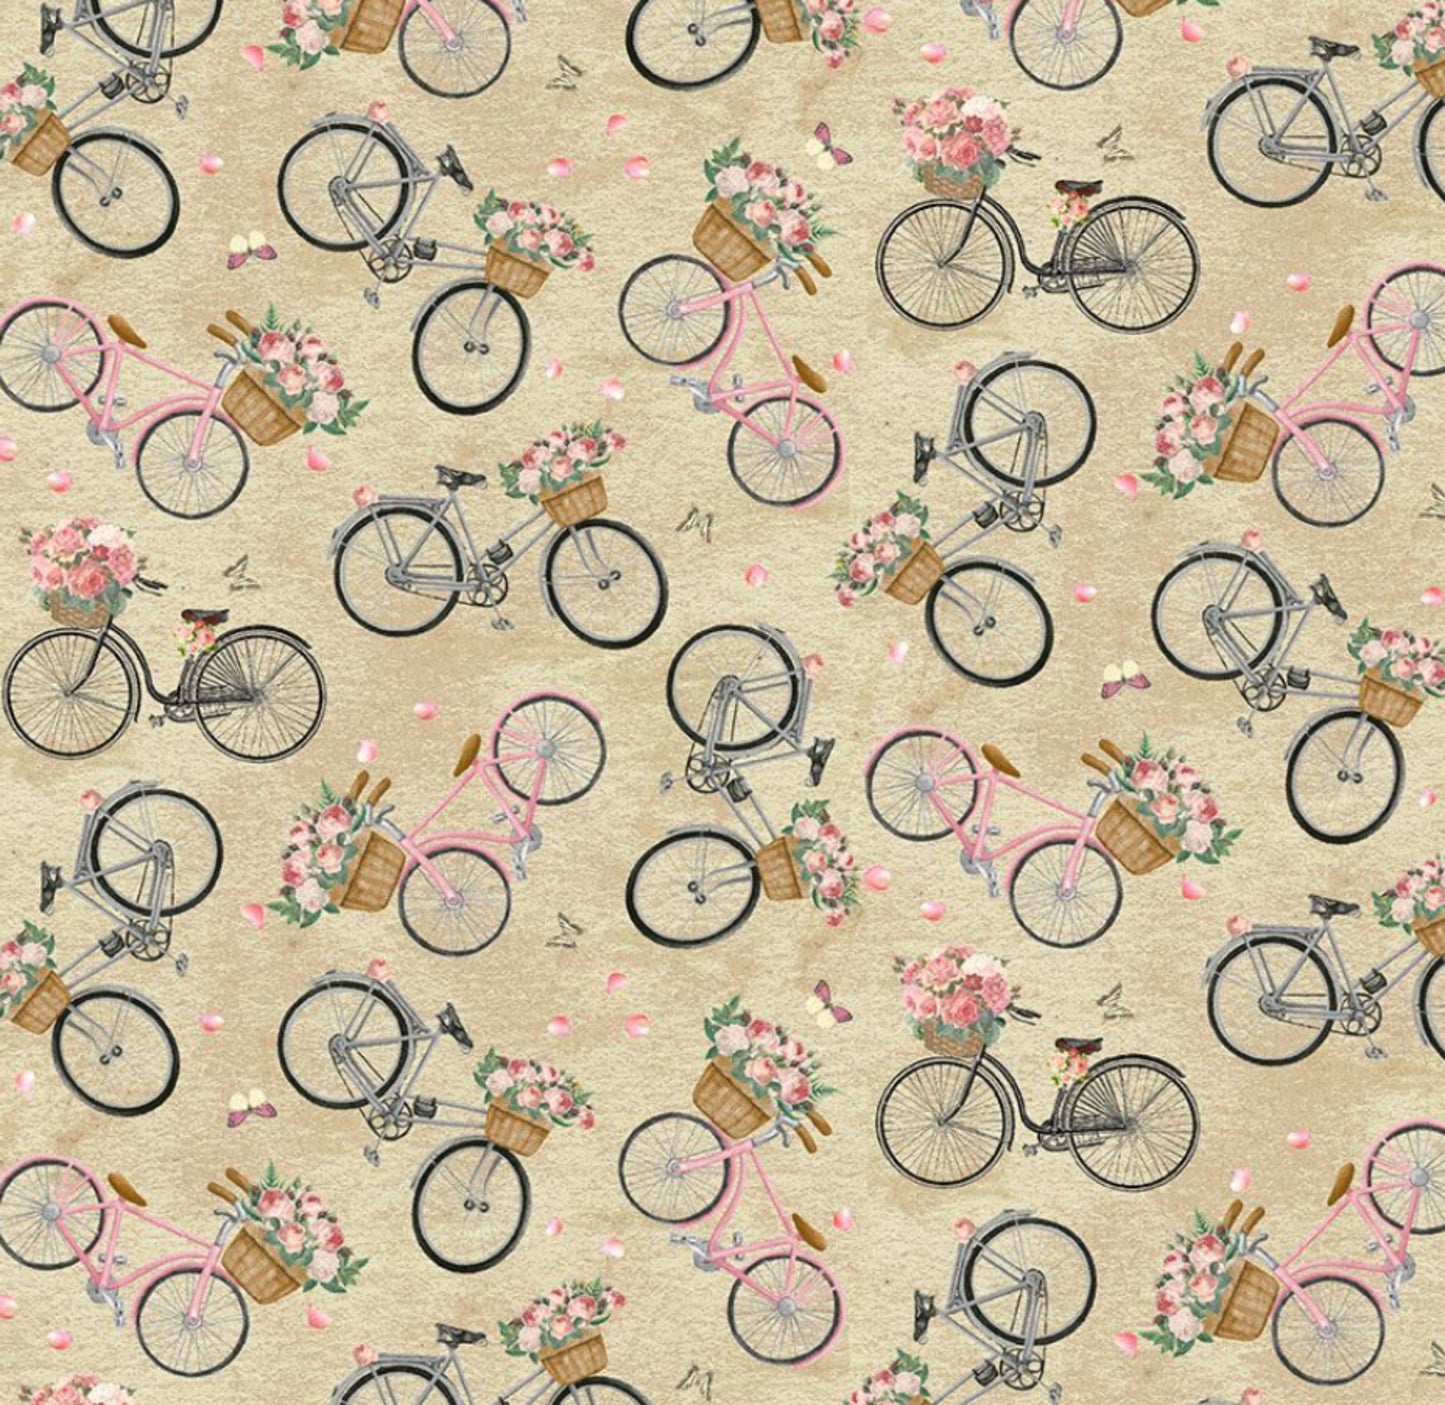 French Floral Bike Fabric - Bicycles Jardin Collection from Timeless Treasures Fabric